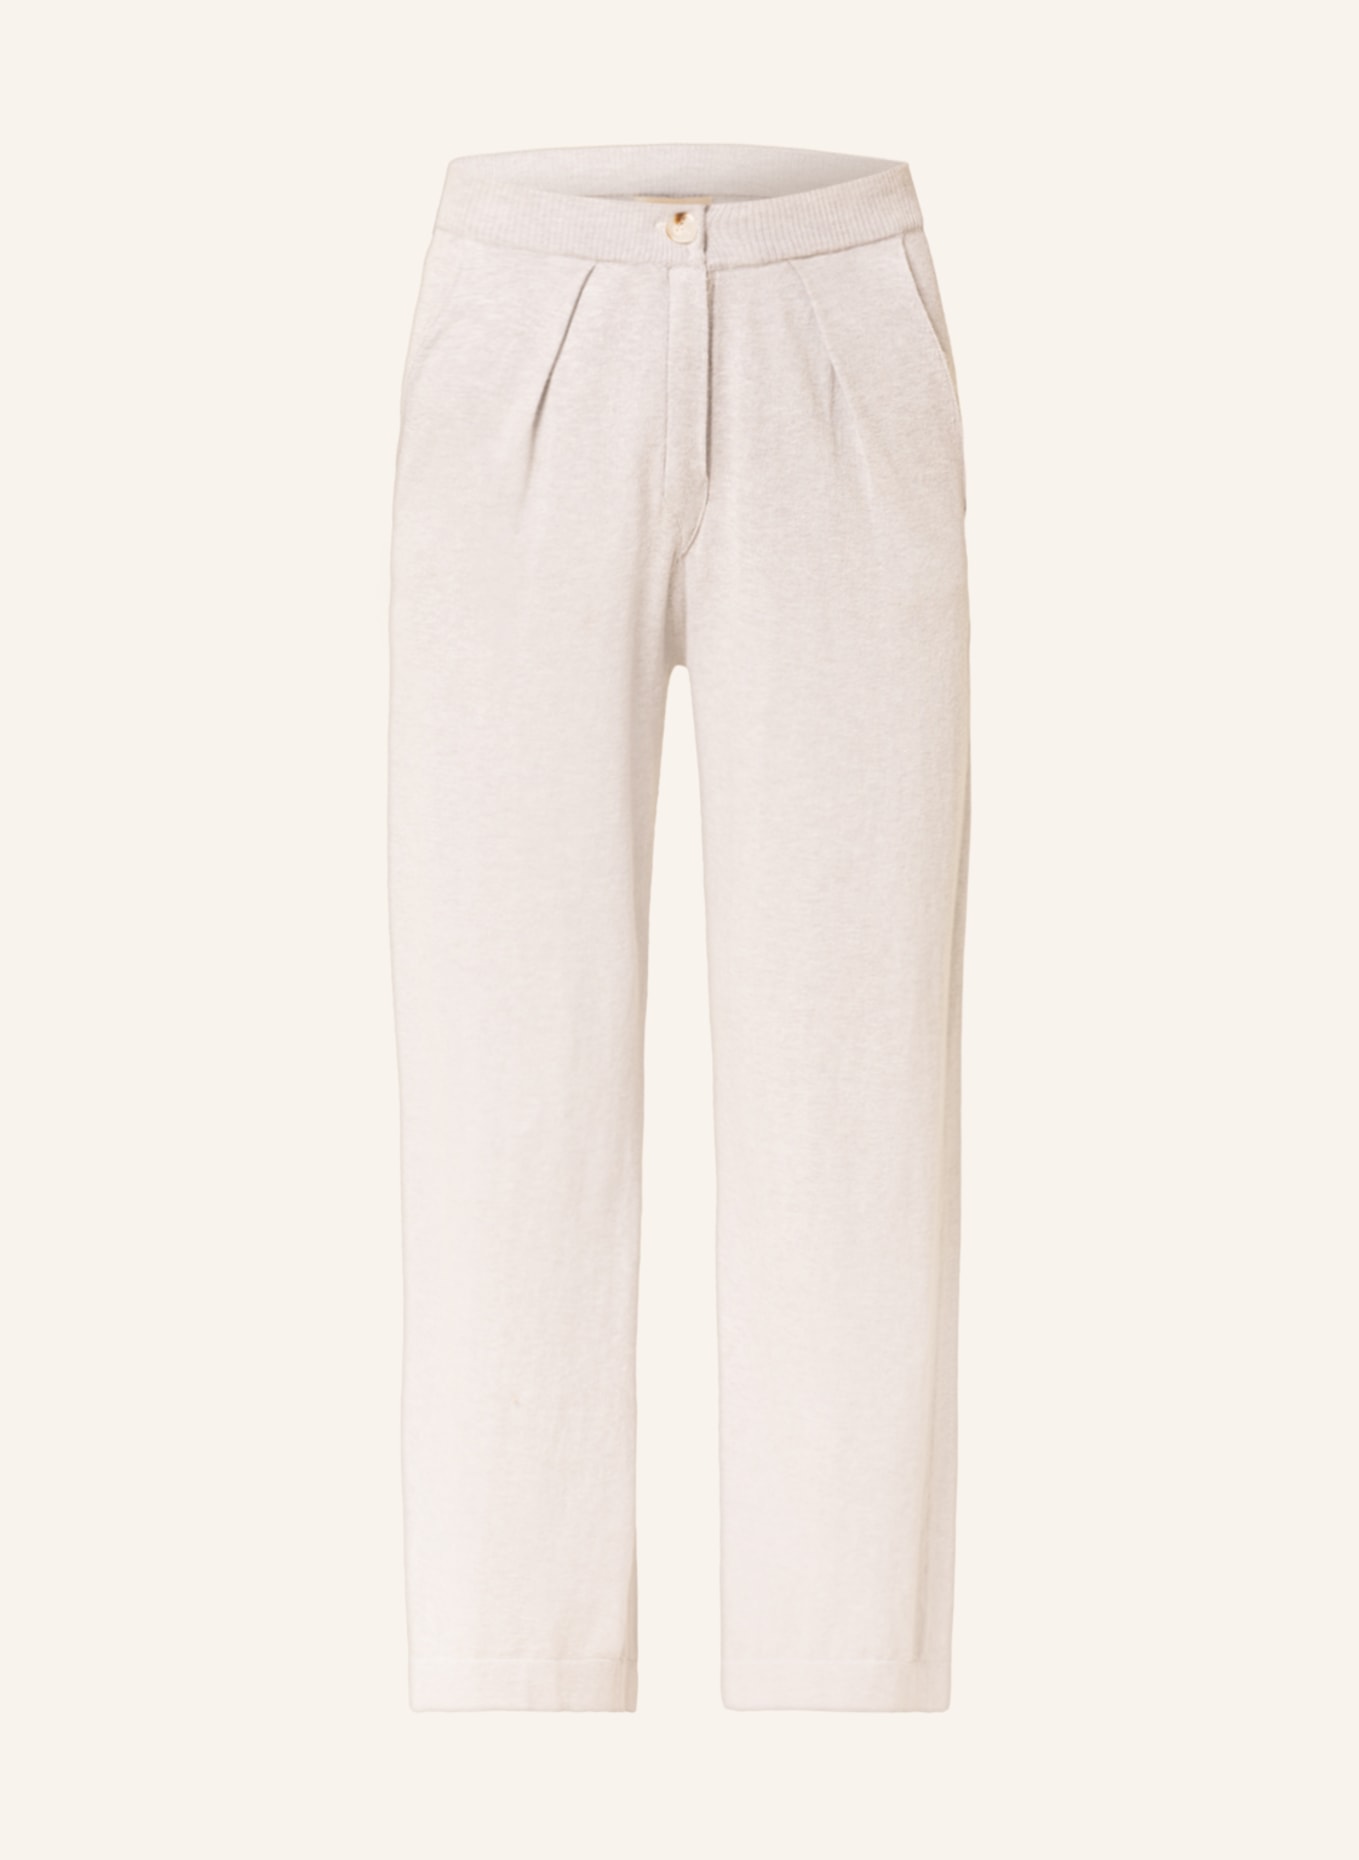 GITTA BANKO Knit trousers in jogger style with cashmere, Color: LIGHT GRAY (Image 1)